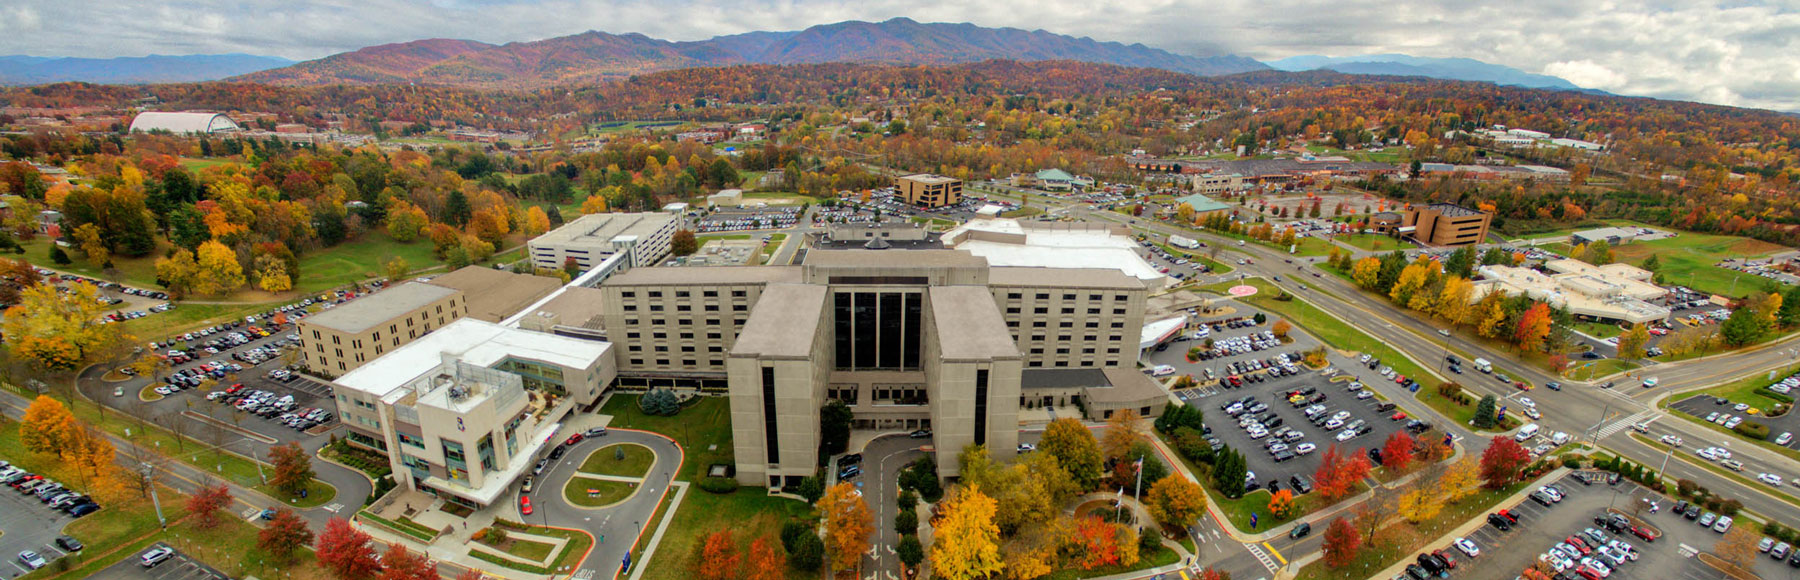 photo: aerial view of Johnson City Medical Center facility